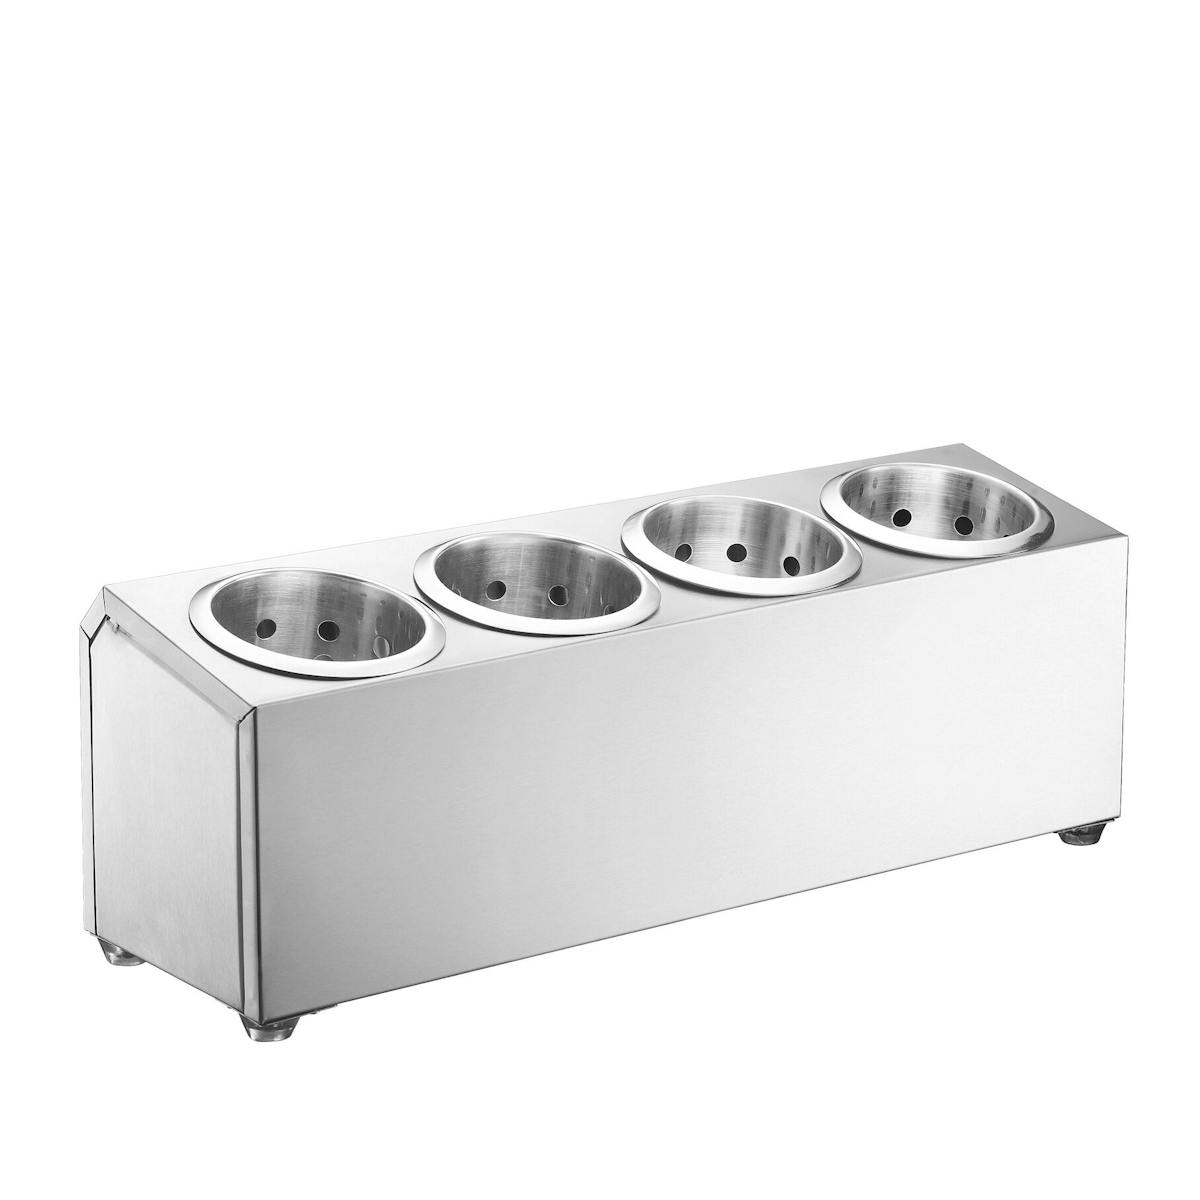 Cutlery tray - for 4 cutlery holders	